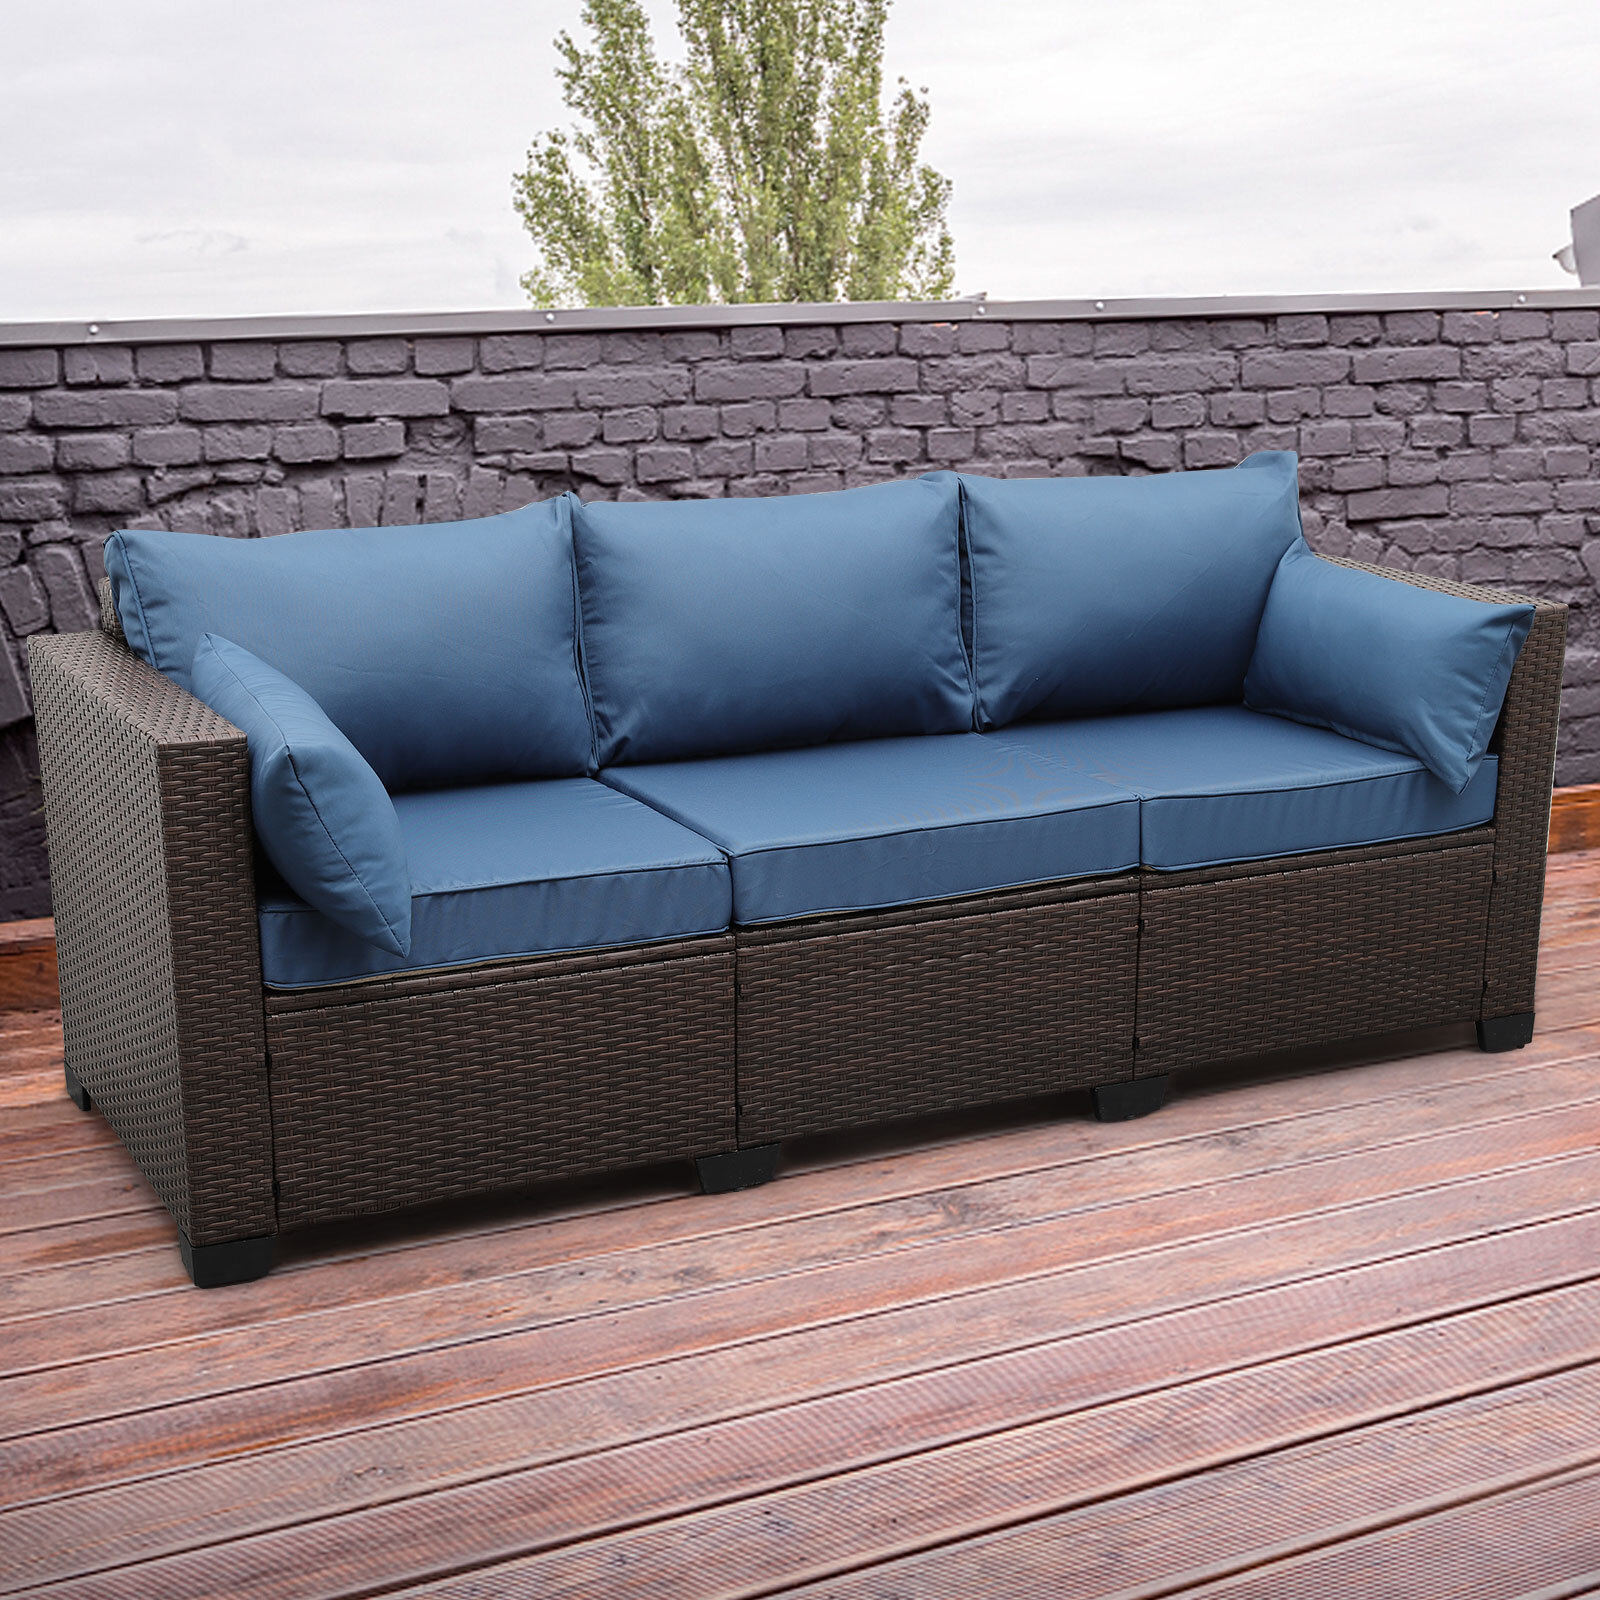 Black Rattan Outdoor Loveseat Sofa Chair Patio Wicker Furniture 2-Seater Sofa with Red Anti-Slip Cushions and Furniture Cover 